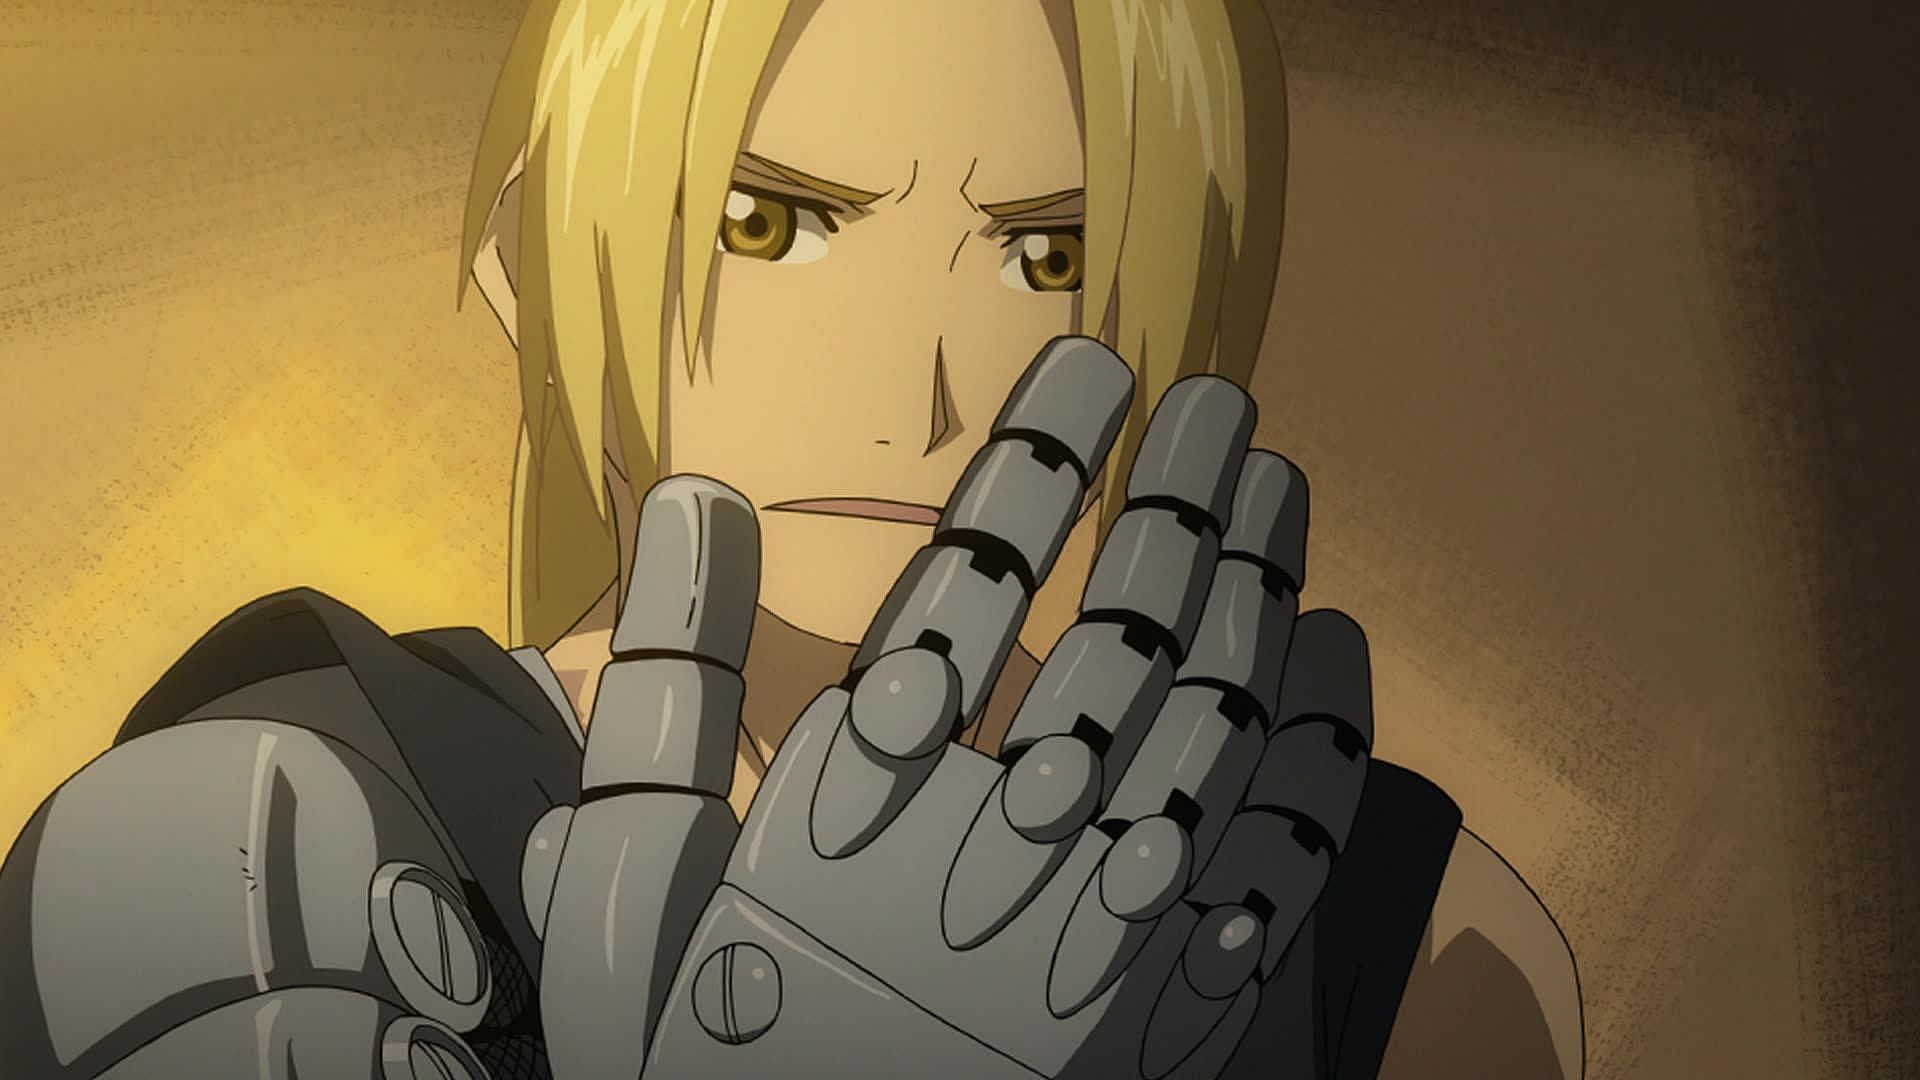 Edward Elric Fullmetal Alchemist edward elric icons cartoon fictional  Character png  PNGEgg